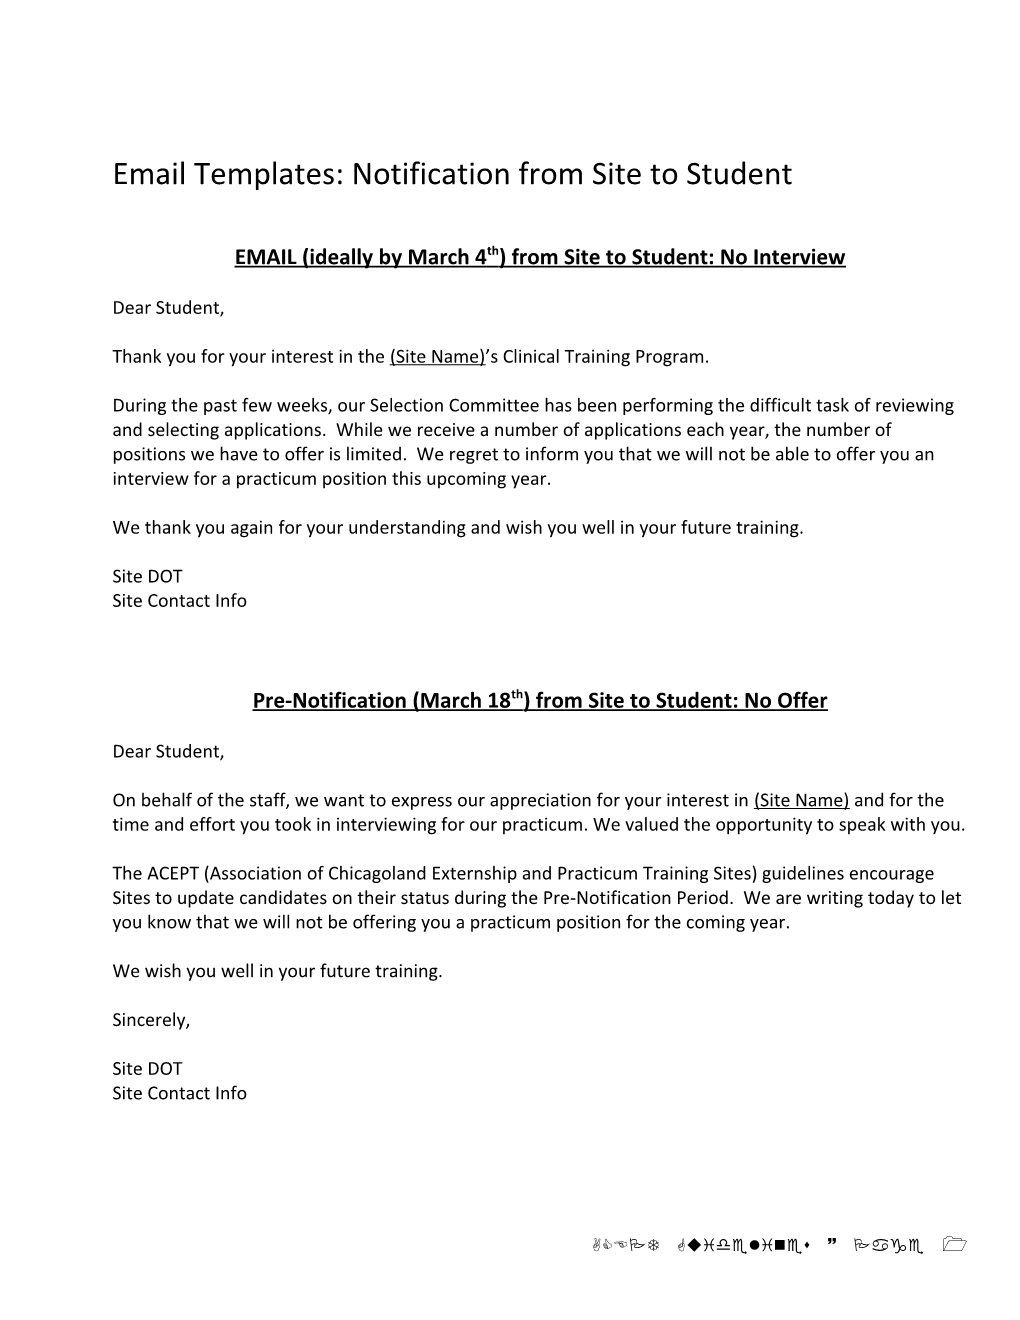 Email Templates: Notification from Site to Student